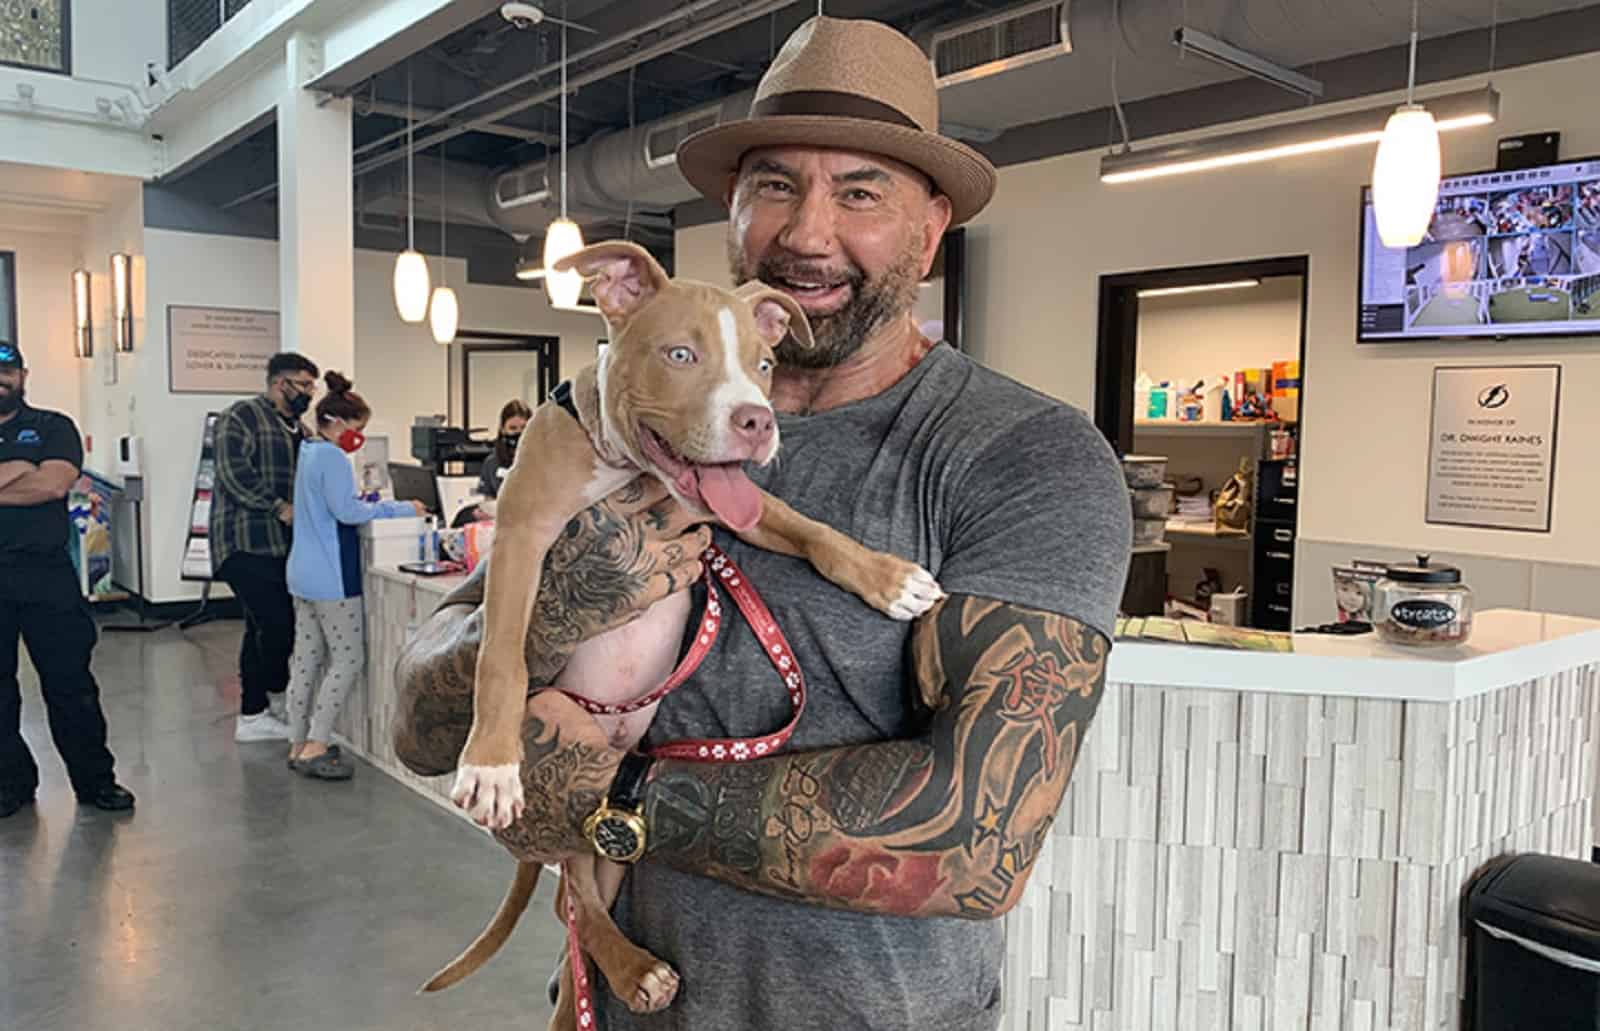 Dave Bautista holding pitbull dog in his arms